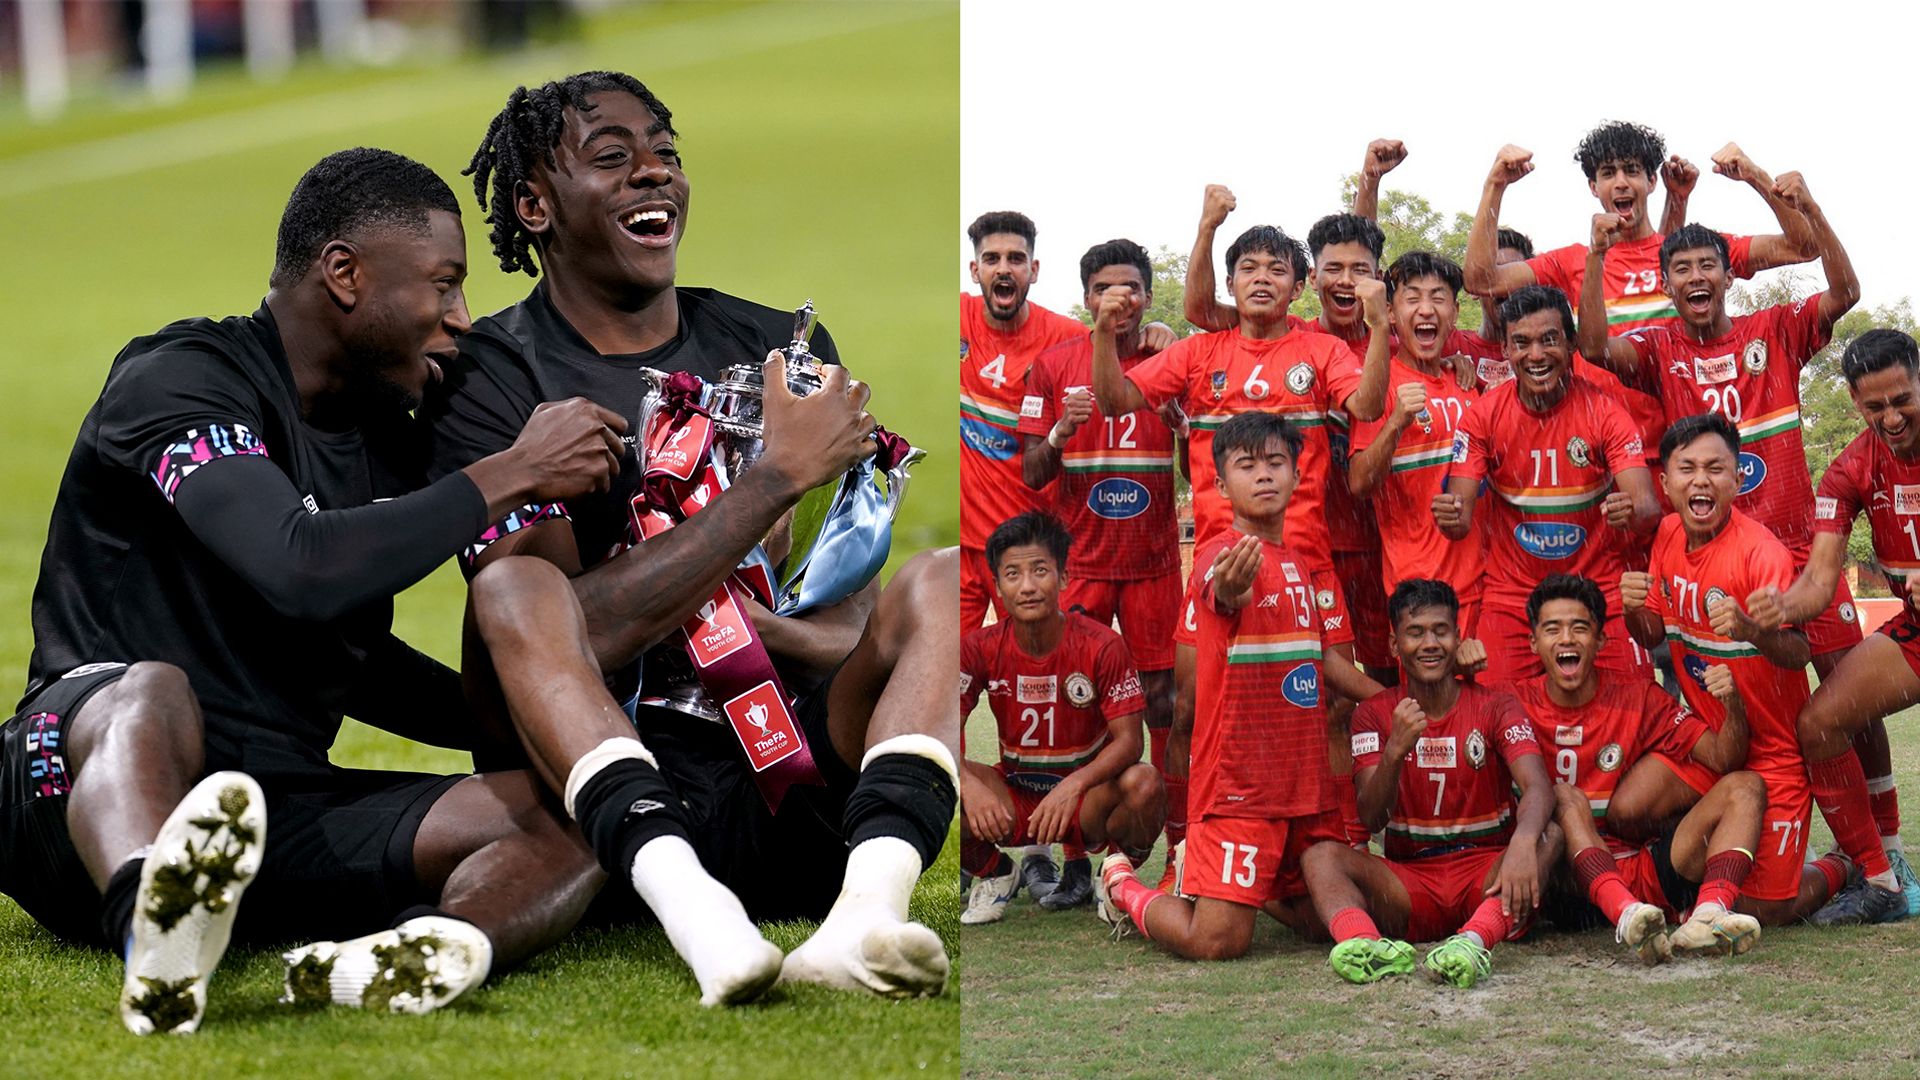 West Ham joined by Everton and Wolves at PL Next Gen Cup in India